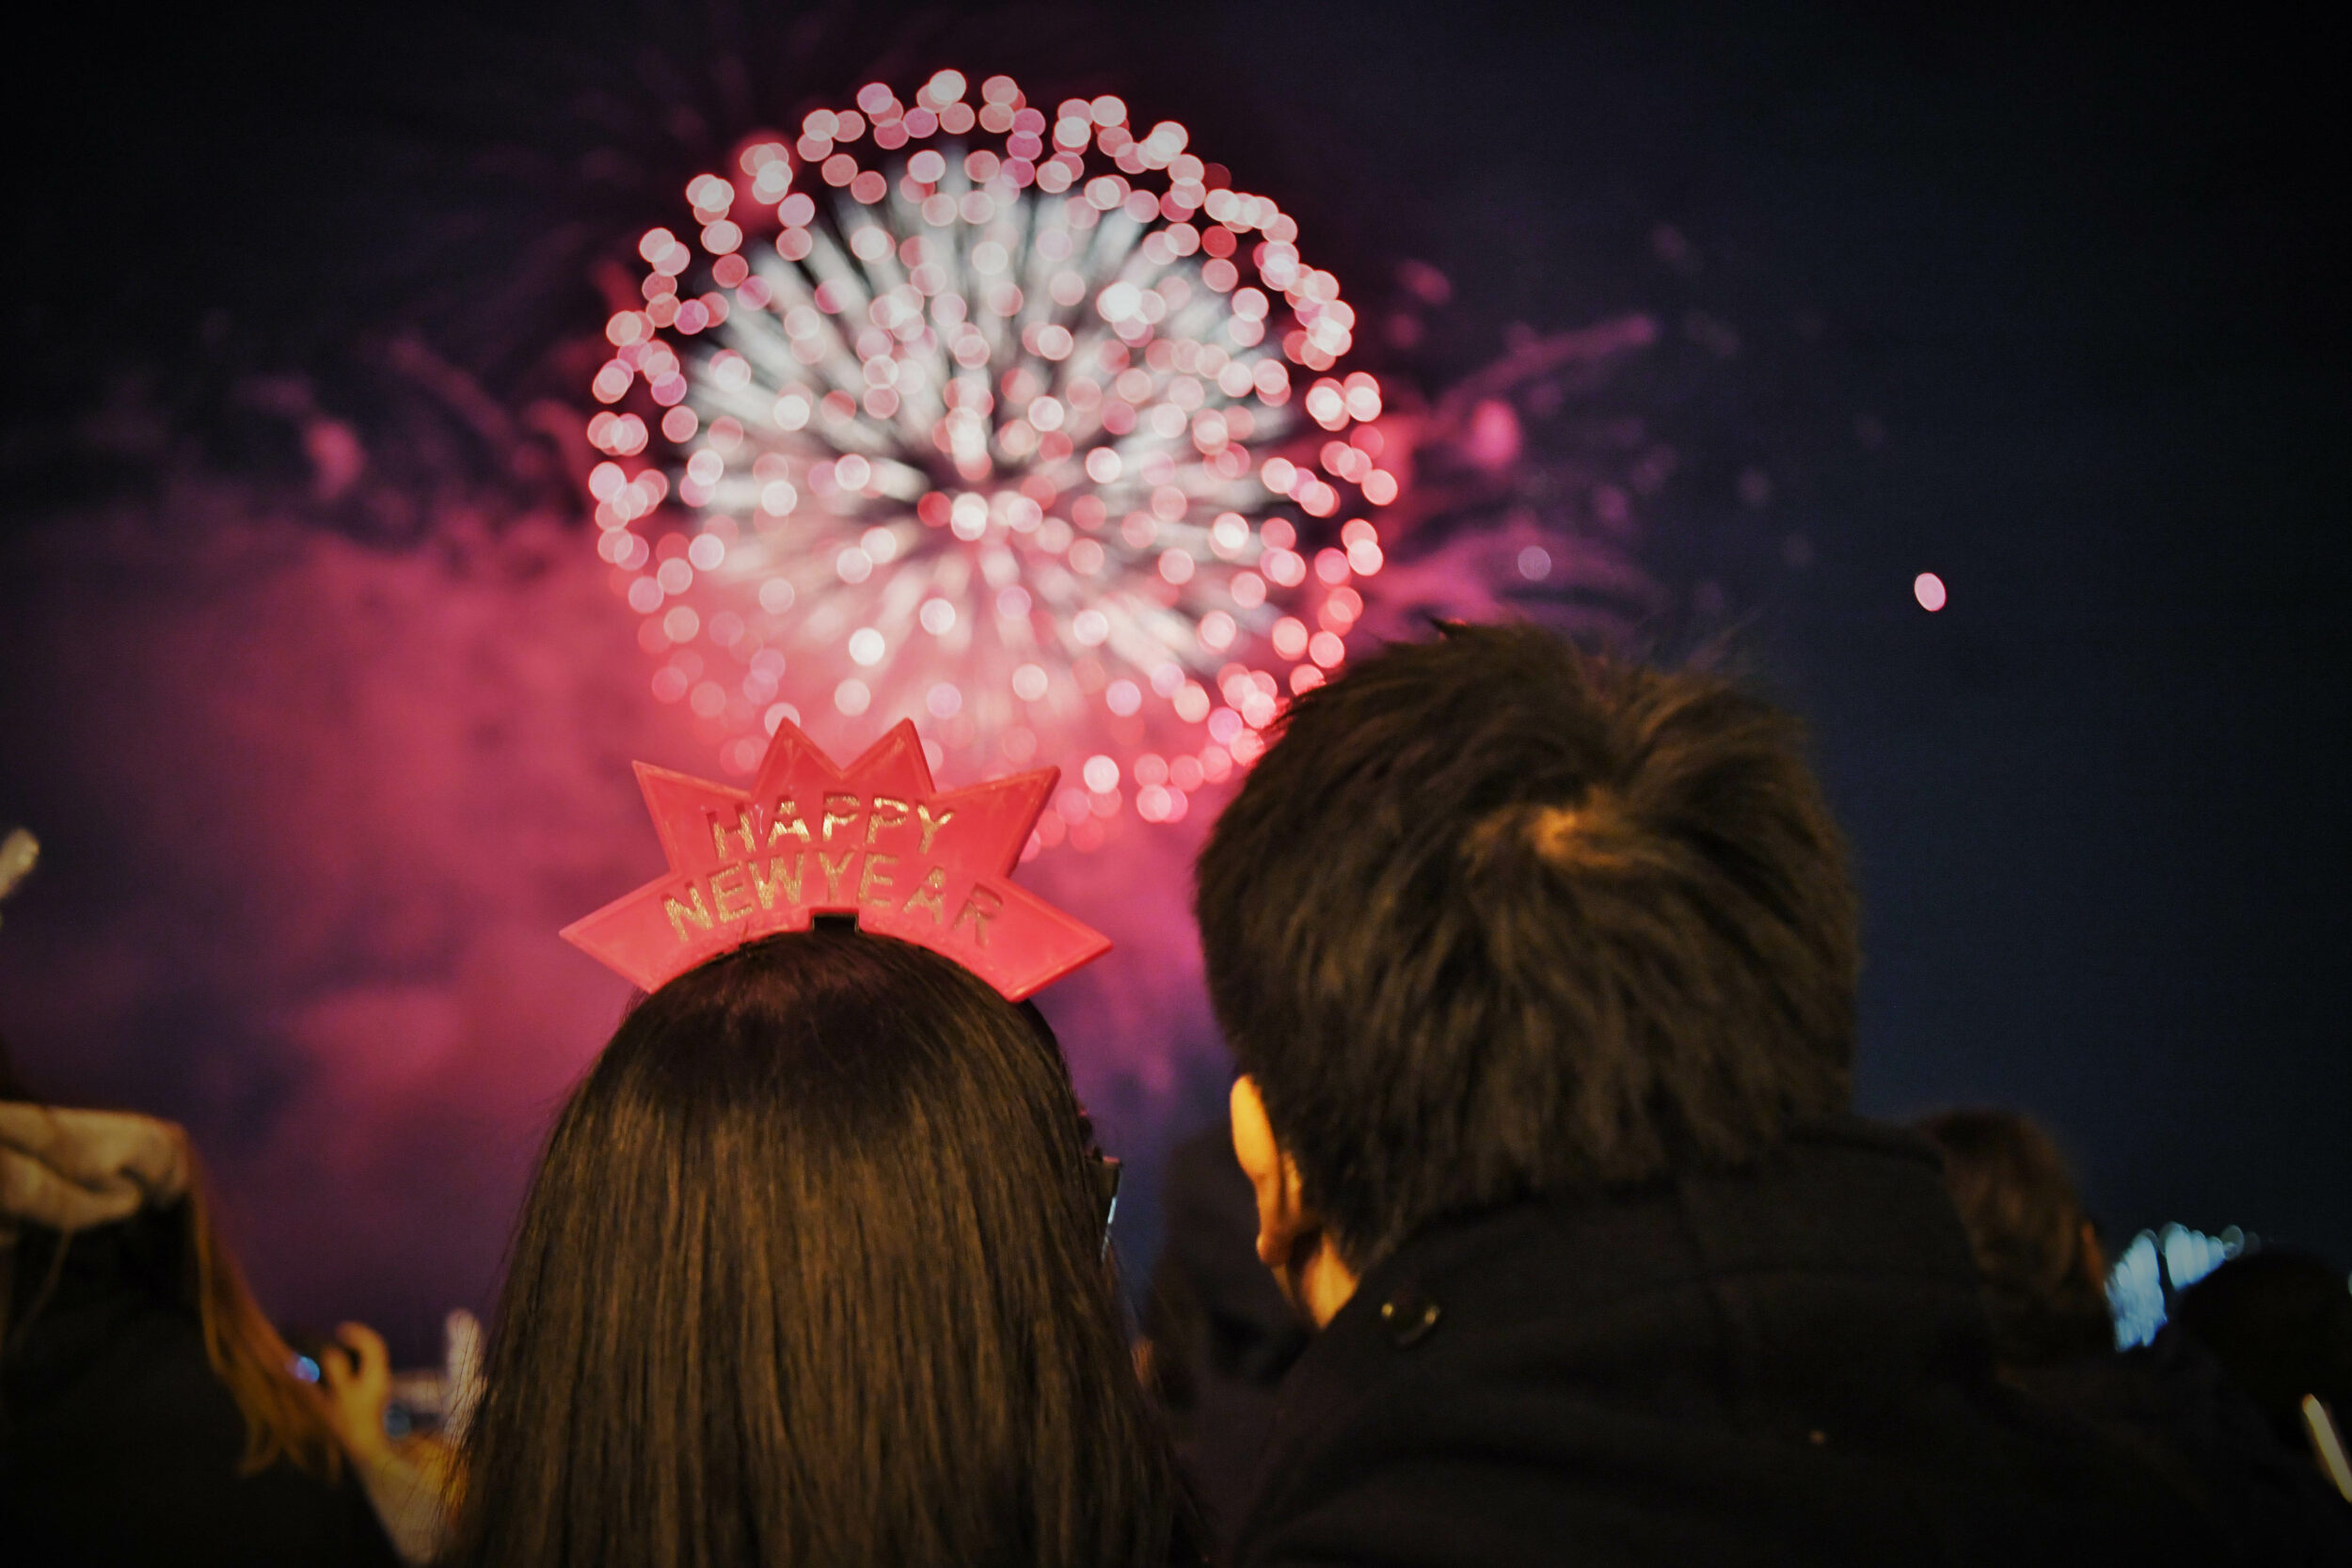 The back of two people's heads with brown hair watch a red and pink fireworks display.